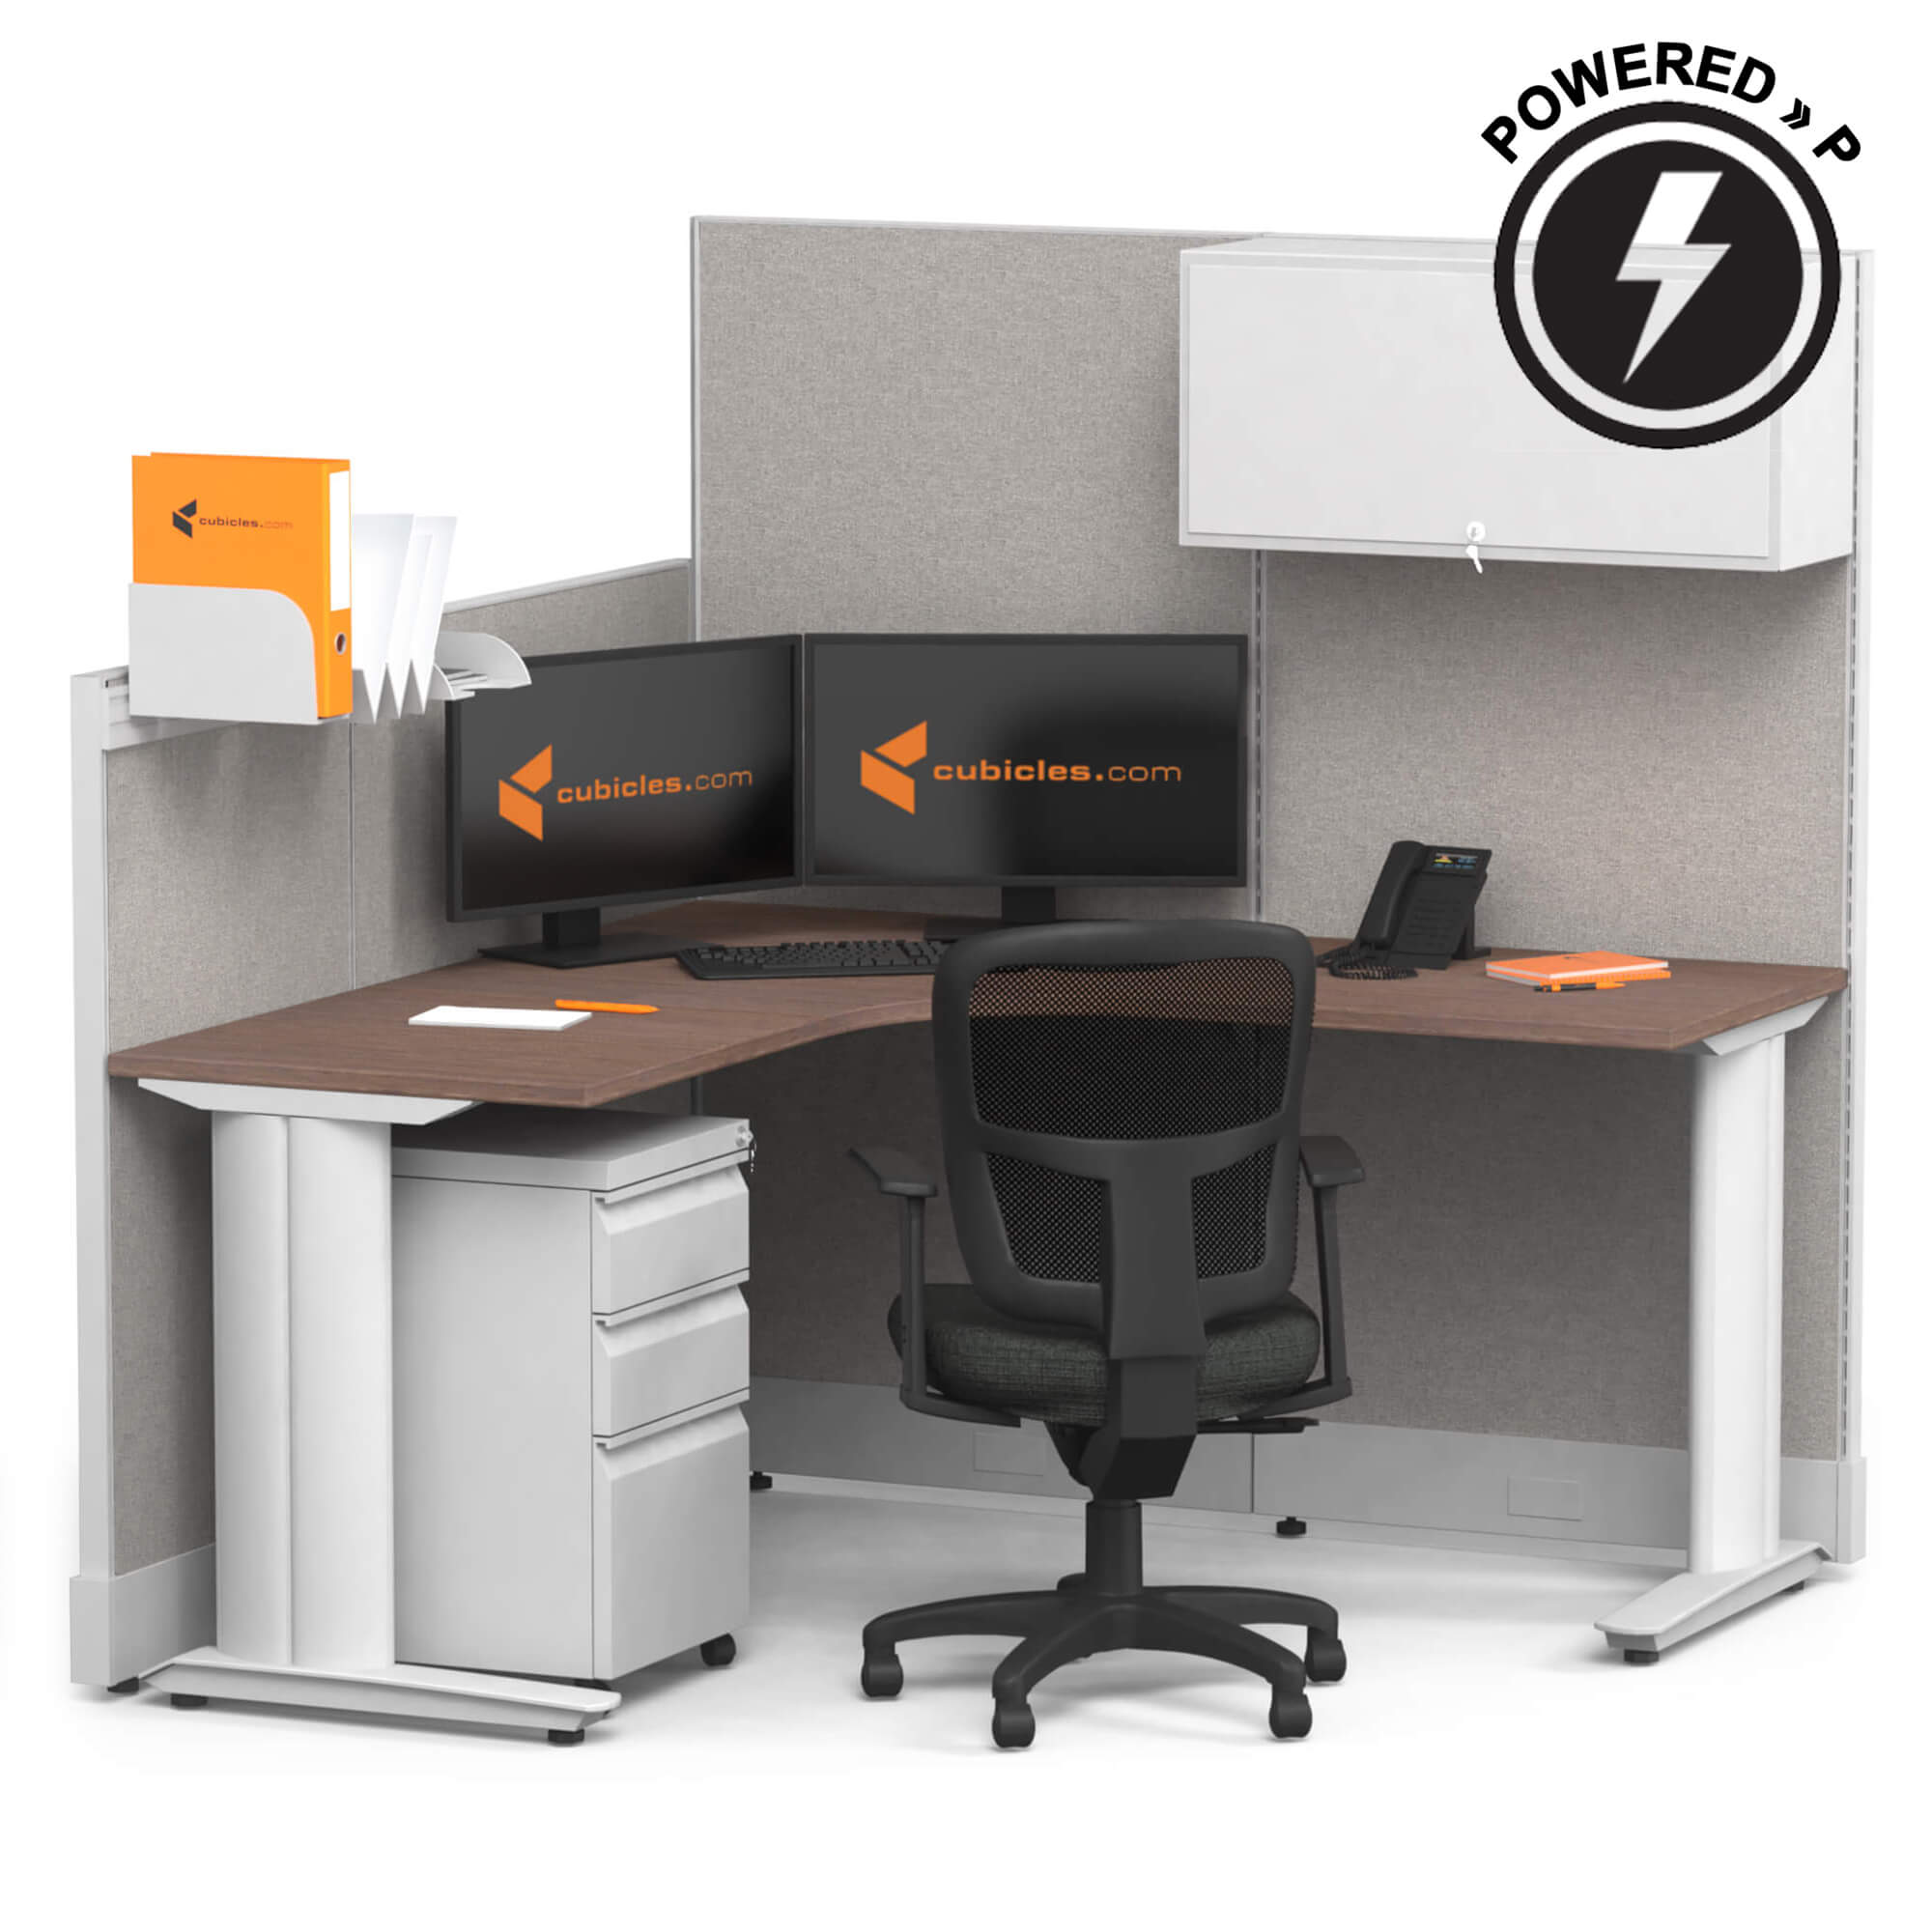 cubicle-desk-l-shaped-with-storage-1pack-powered-sign.jpg